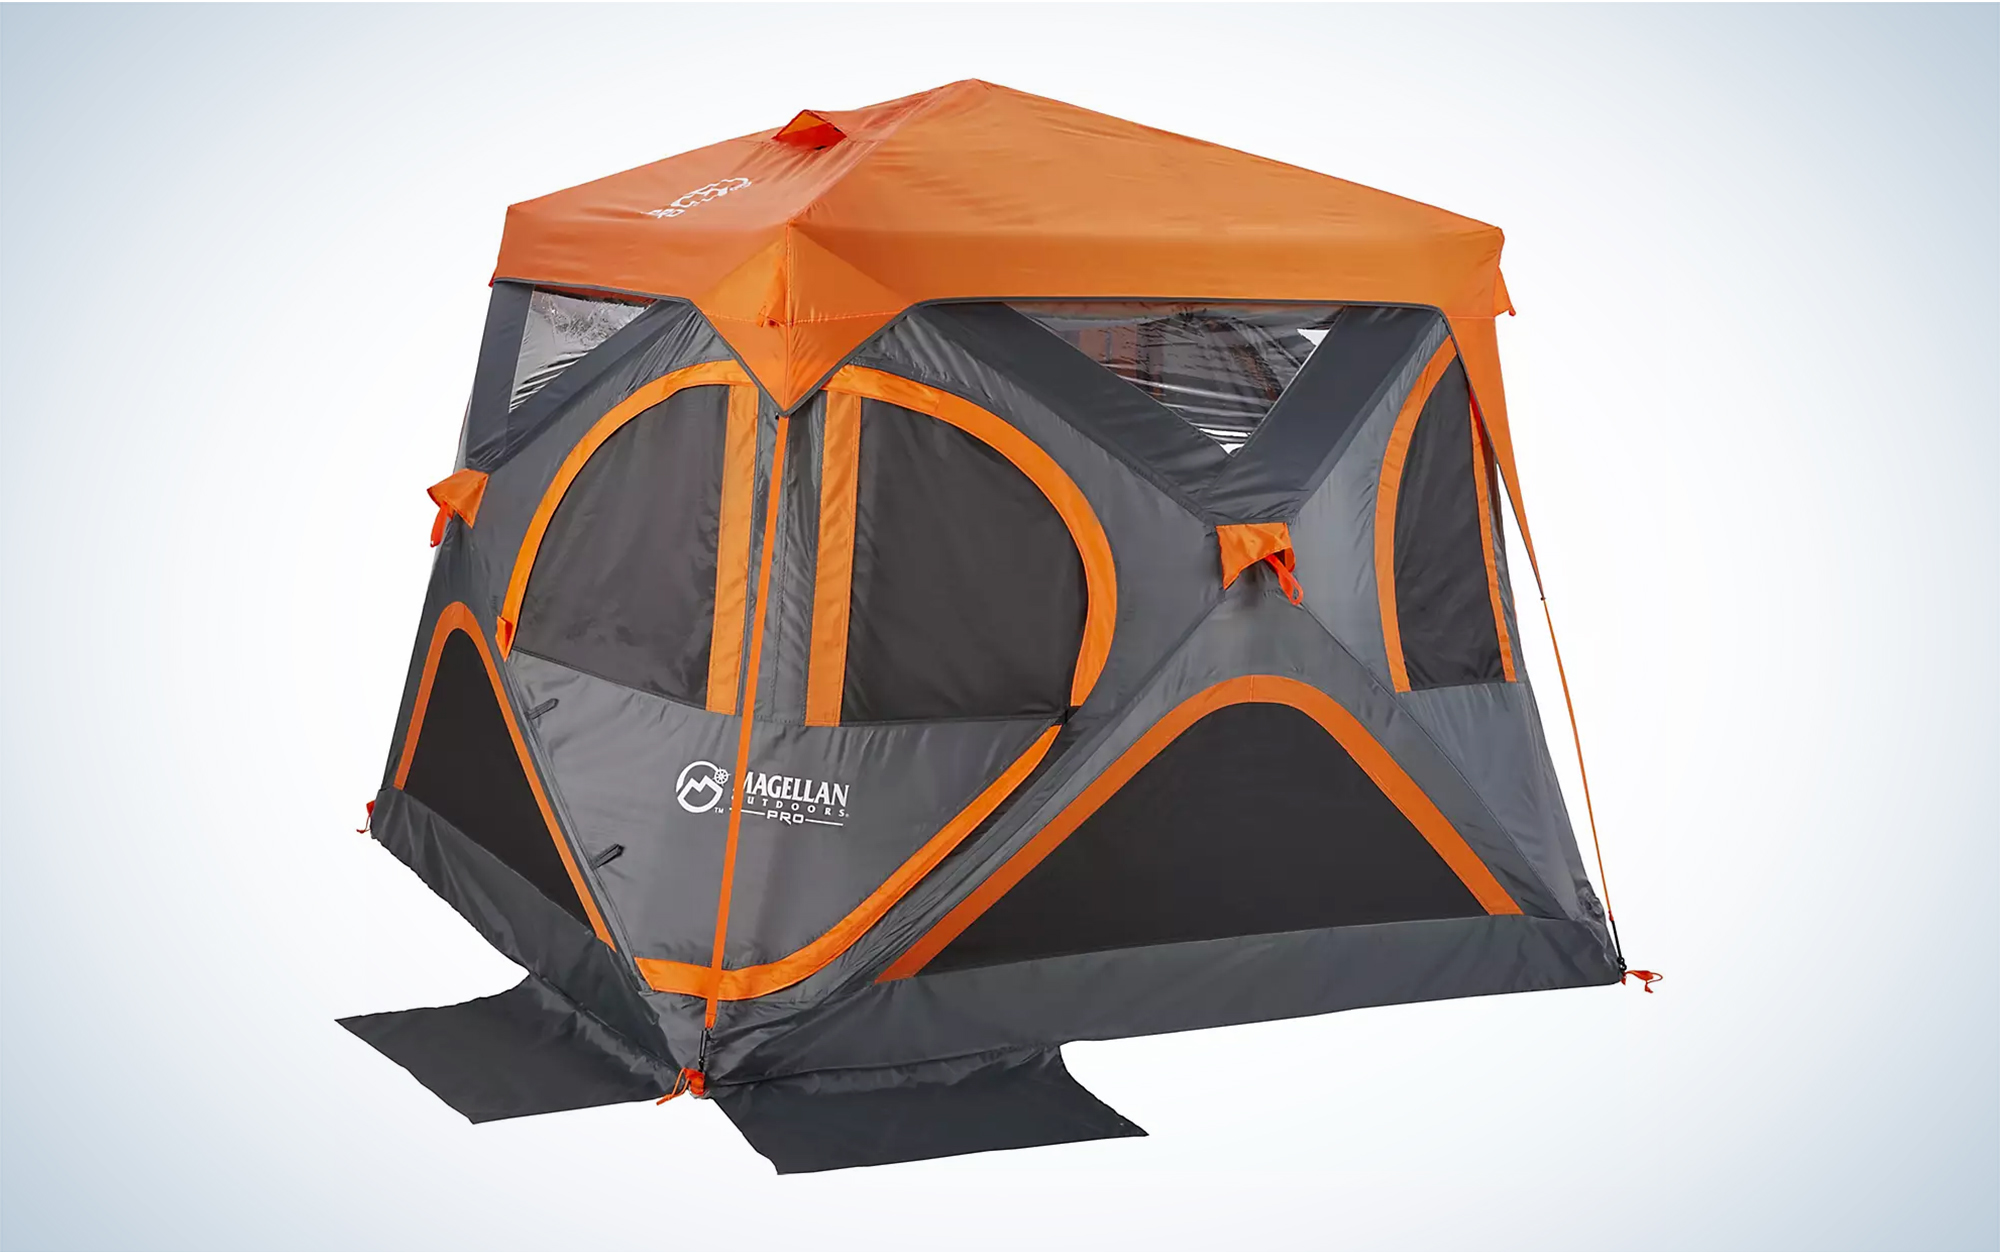 Inflatable Hot Tents: Innovation or Gimmick? - Beyond The Tent